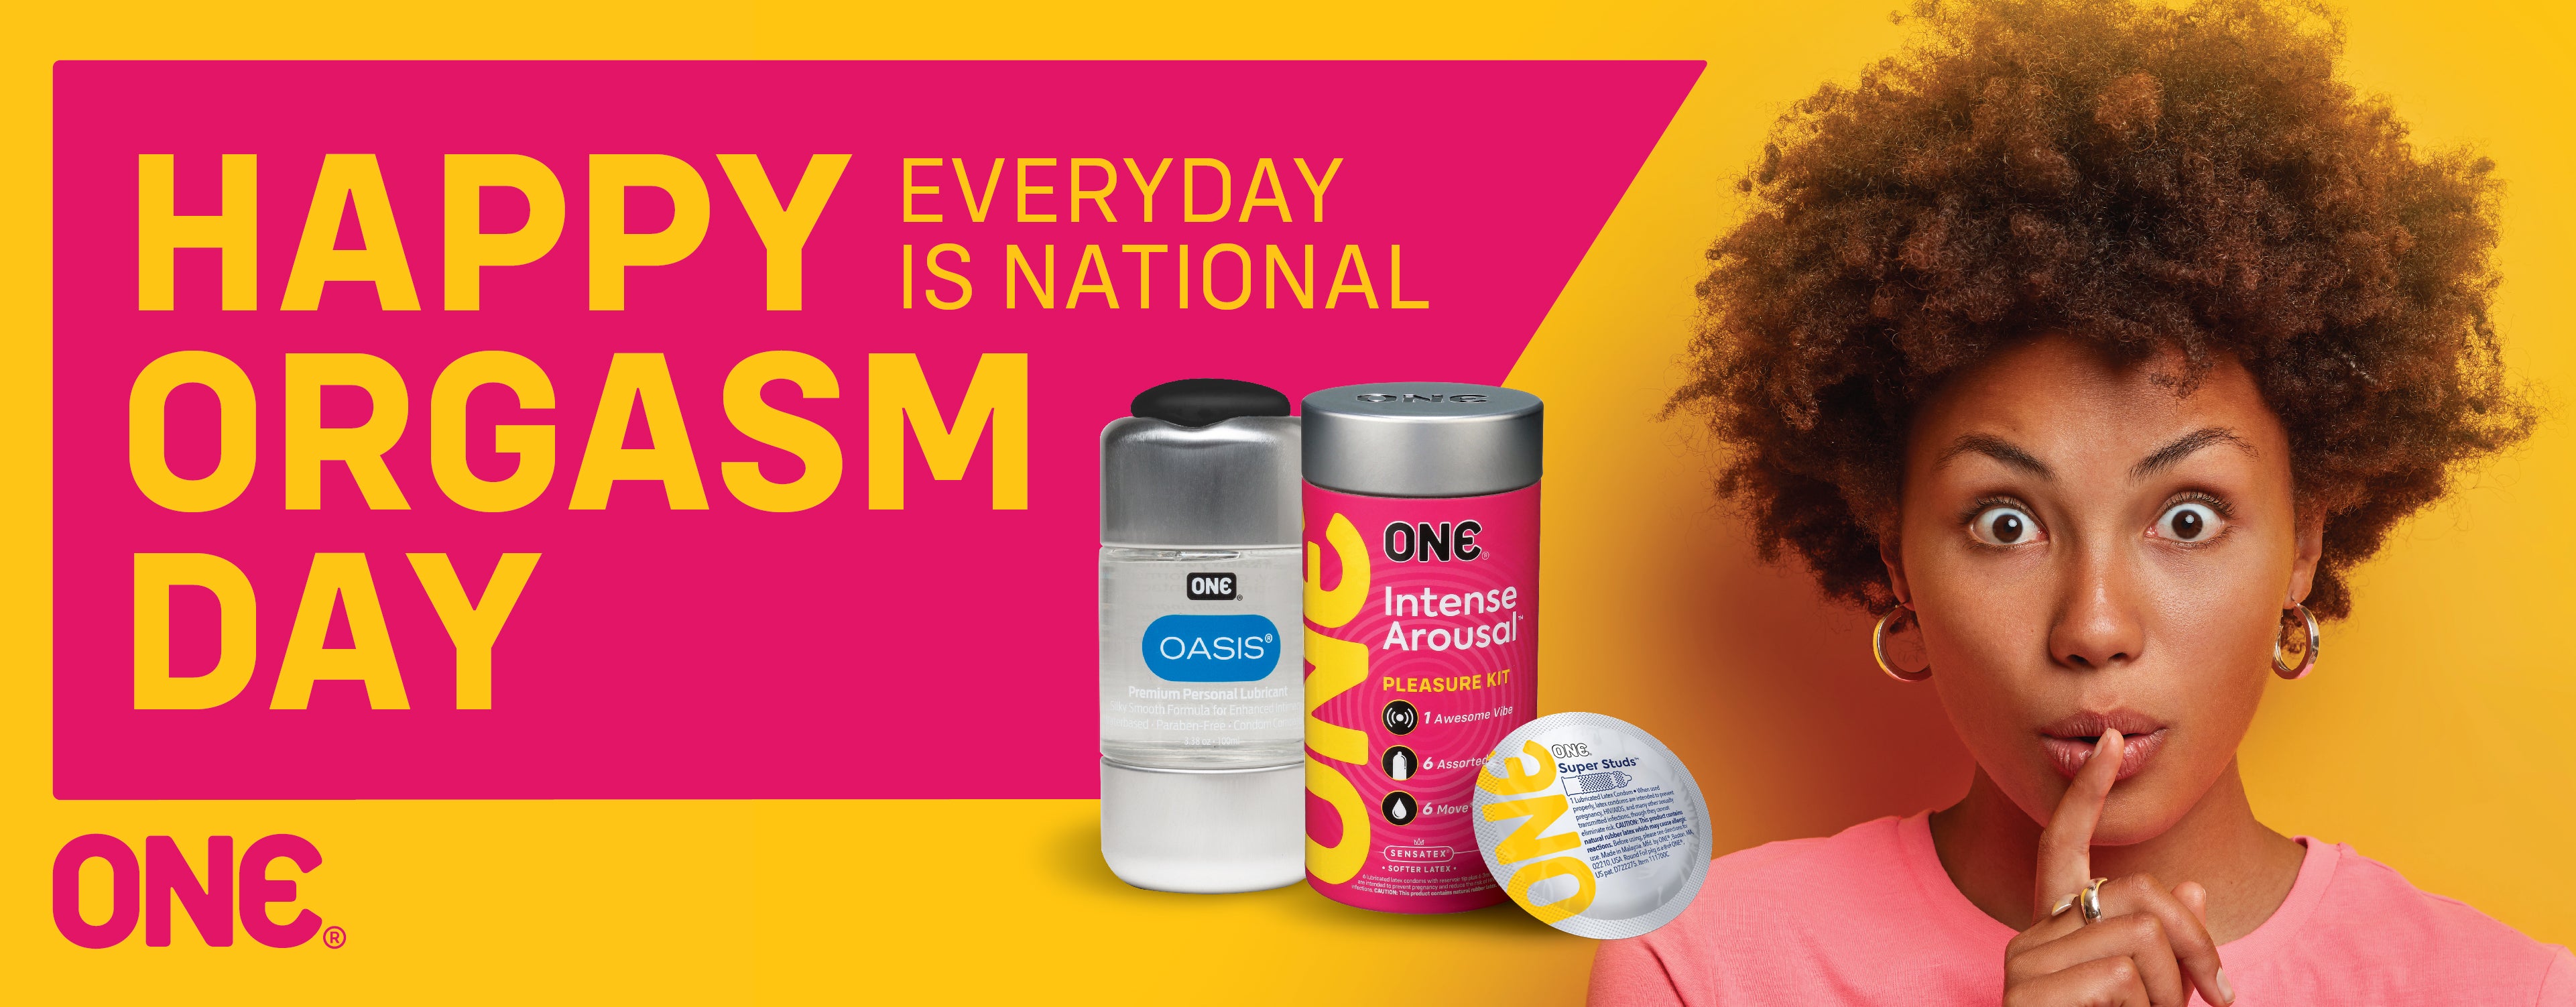 Promotion for Orgasm Day with Intense Arousal and Oasis Lubricant